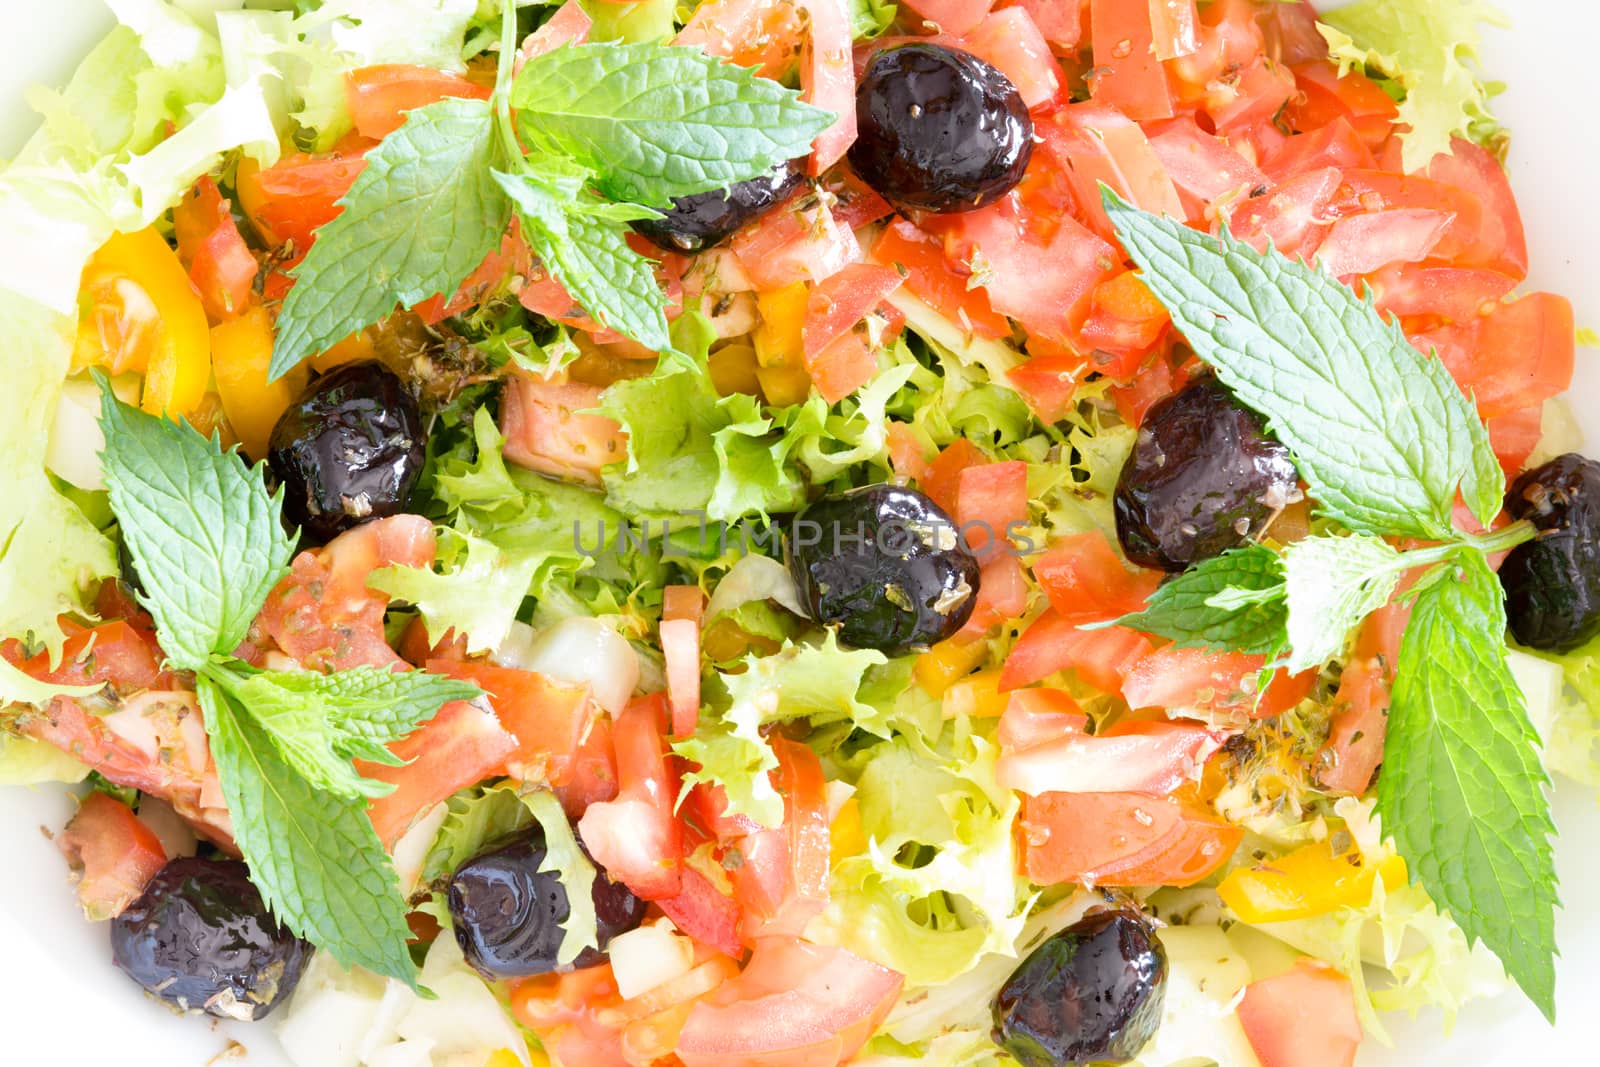 Fresh plain Mediterranean salad with olives, lettuce, tomato and colorful bell peppers garnished with sprigs of fresh mint, close up view from above